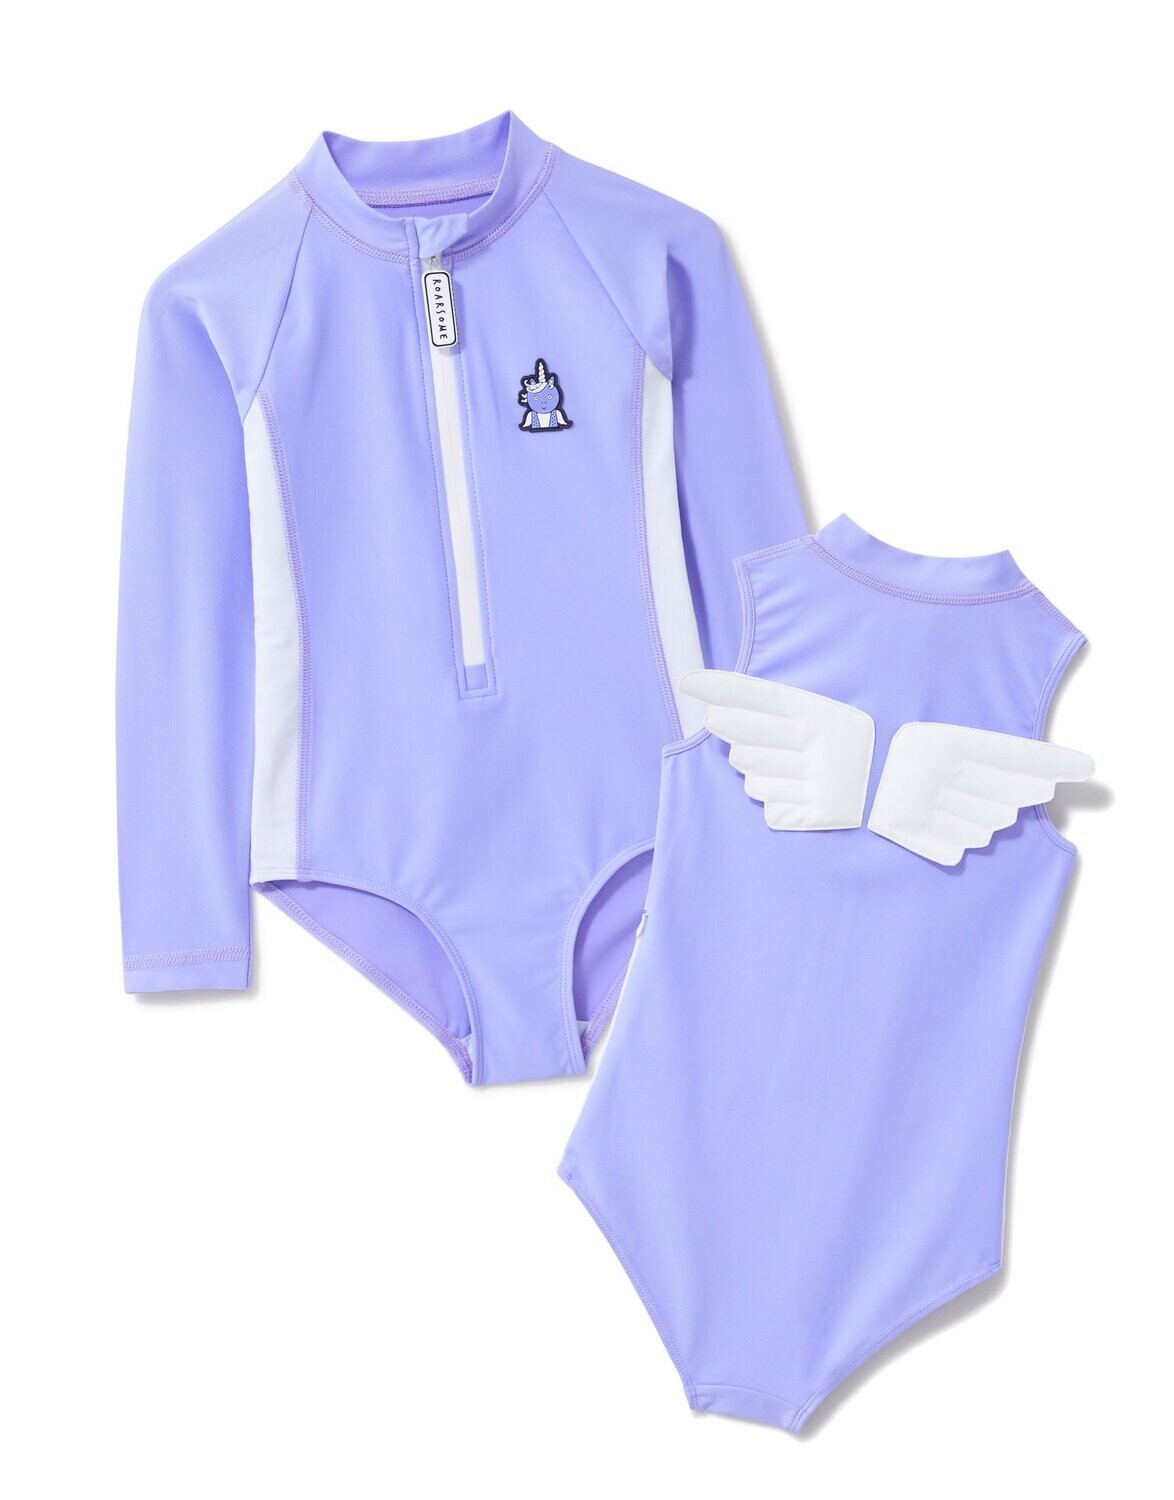 NEW Sparkle the Unicorn - Swimsuit for Girls, Age: 1-2 yrs